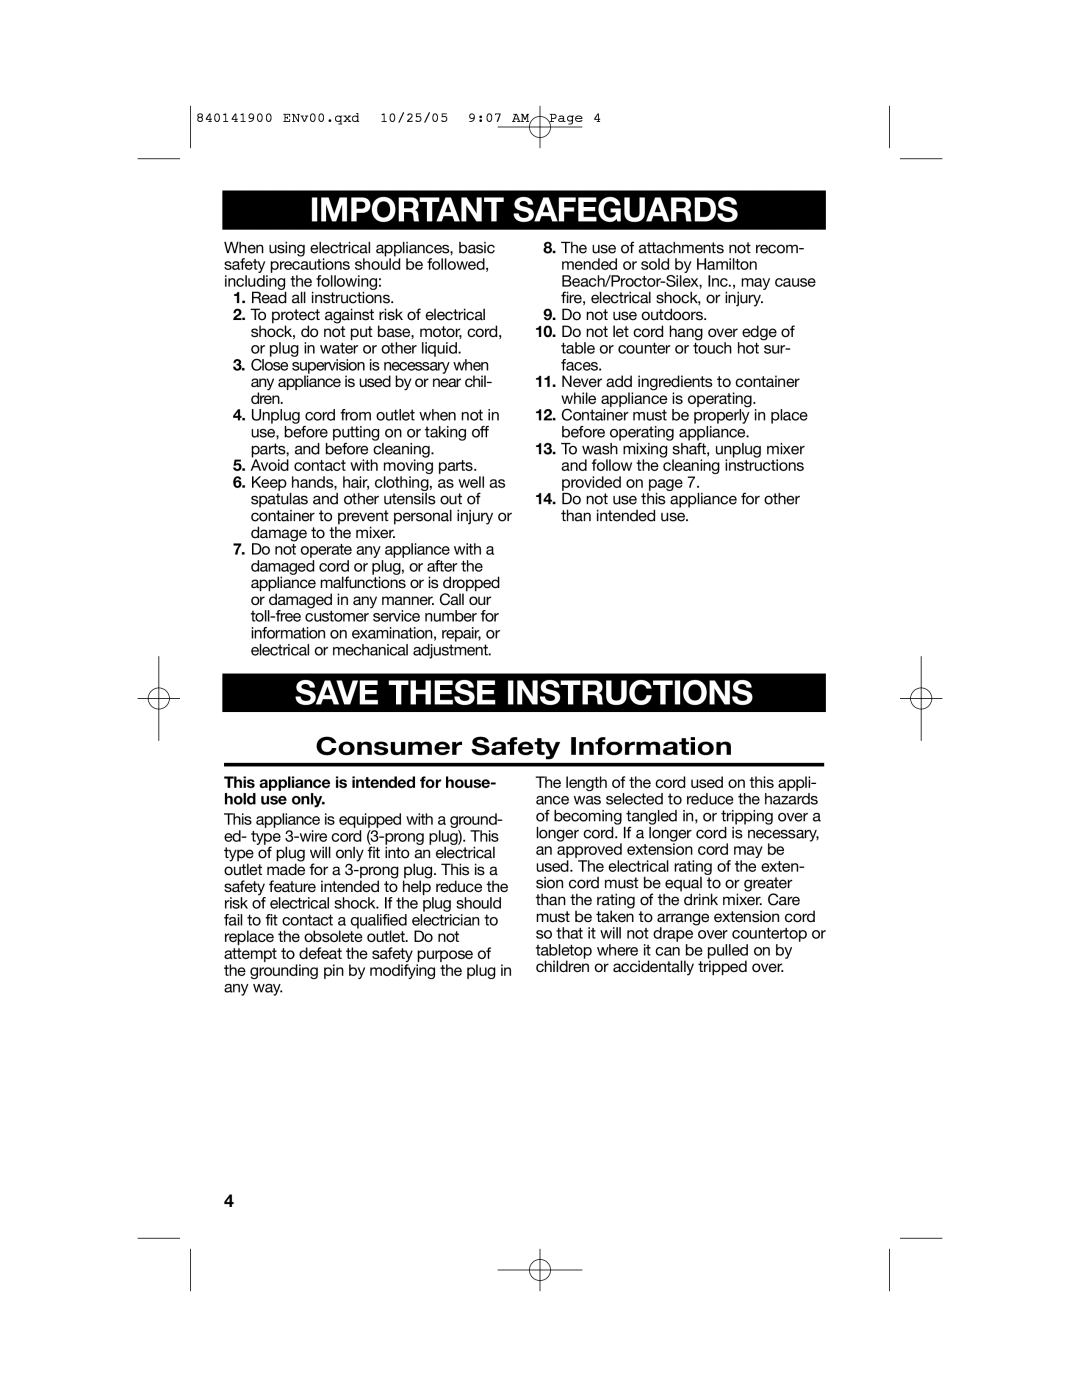 Hamilton Beach 840141900 manual Important Safeguards, Save These Instructions, Consumer Safety Information 